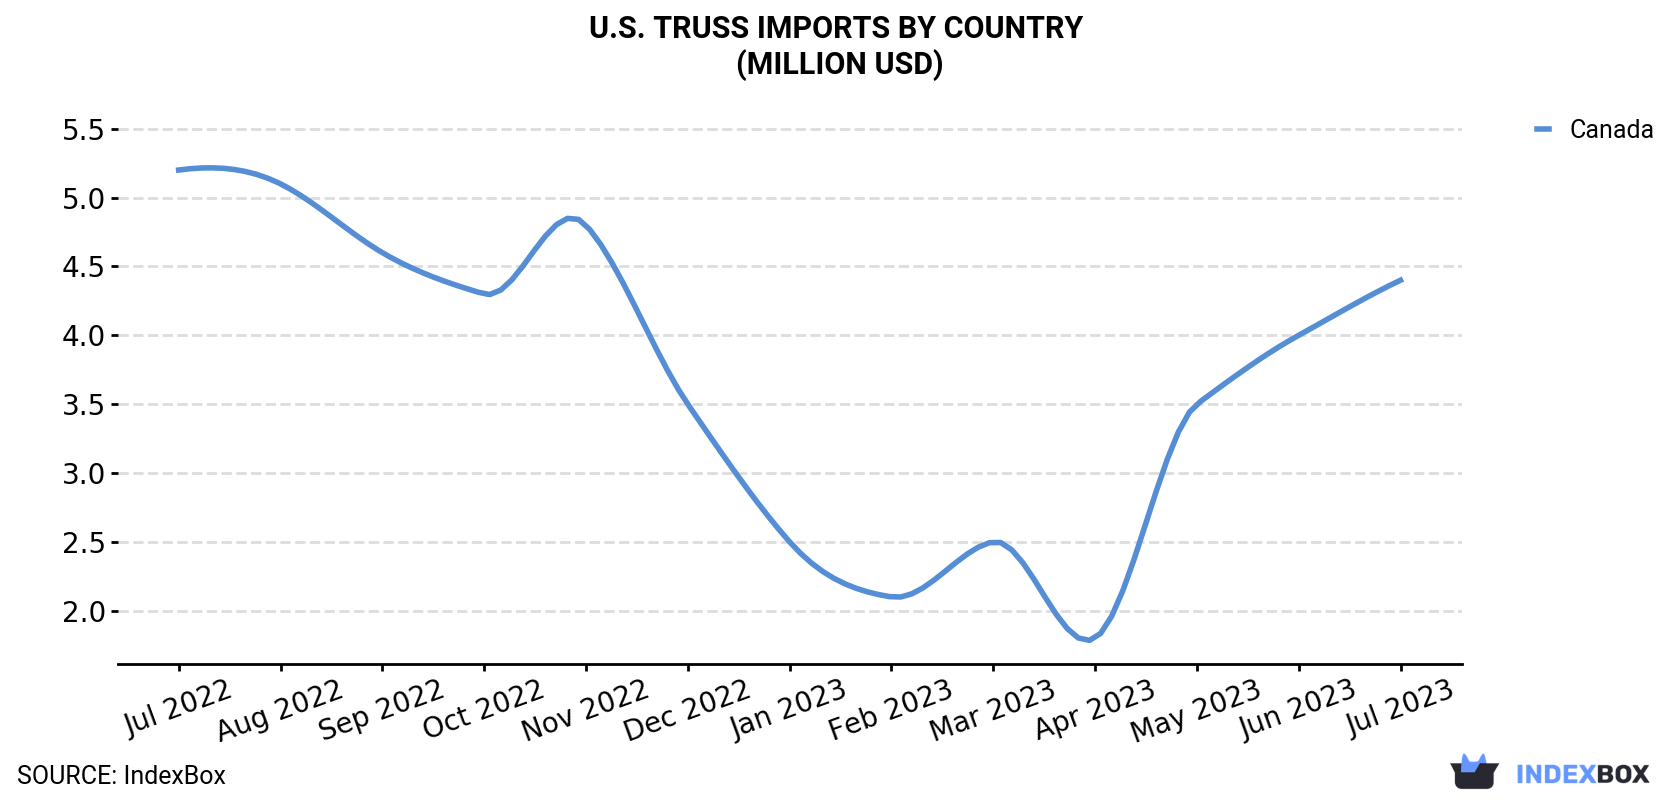 U.S. Truss Imports By Country (Million USD)